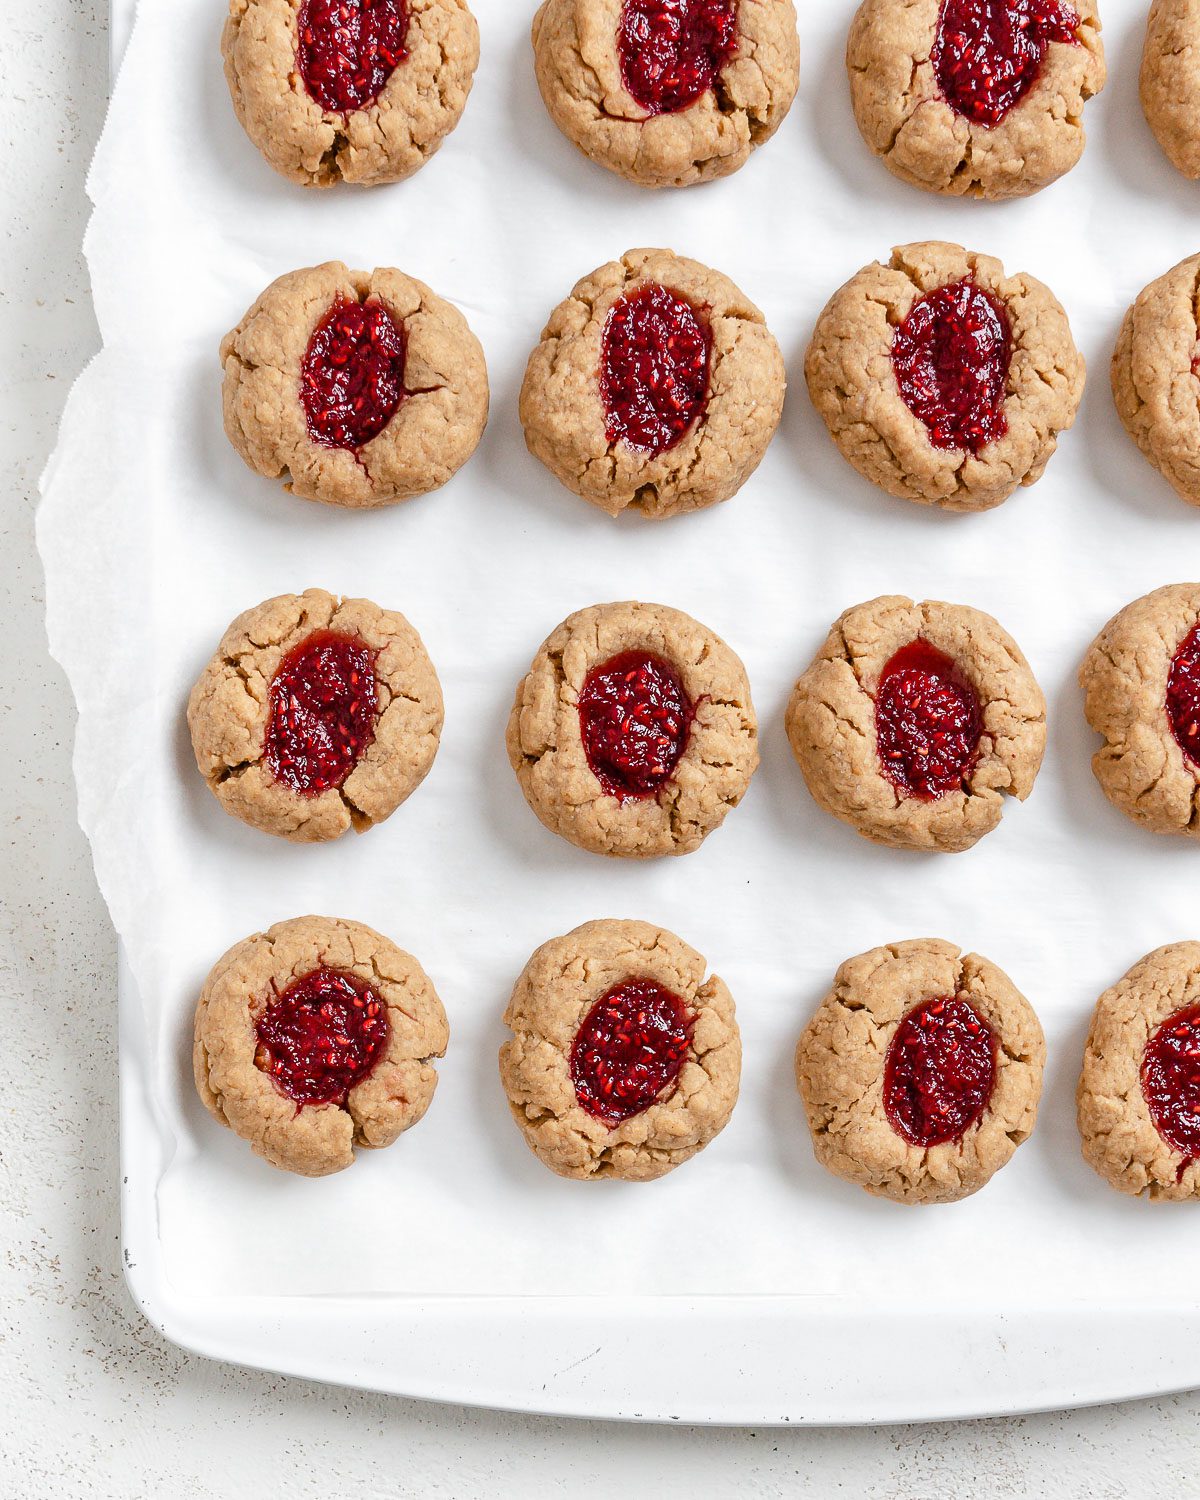 completed Vegan Peanut Butter and Jelly Thumbprint Cookies scattered on cookie sheet